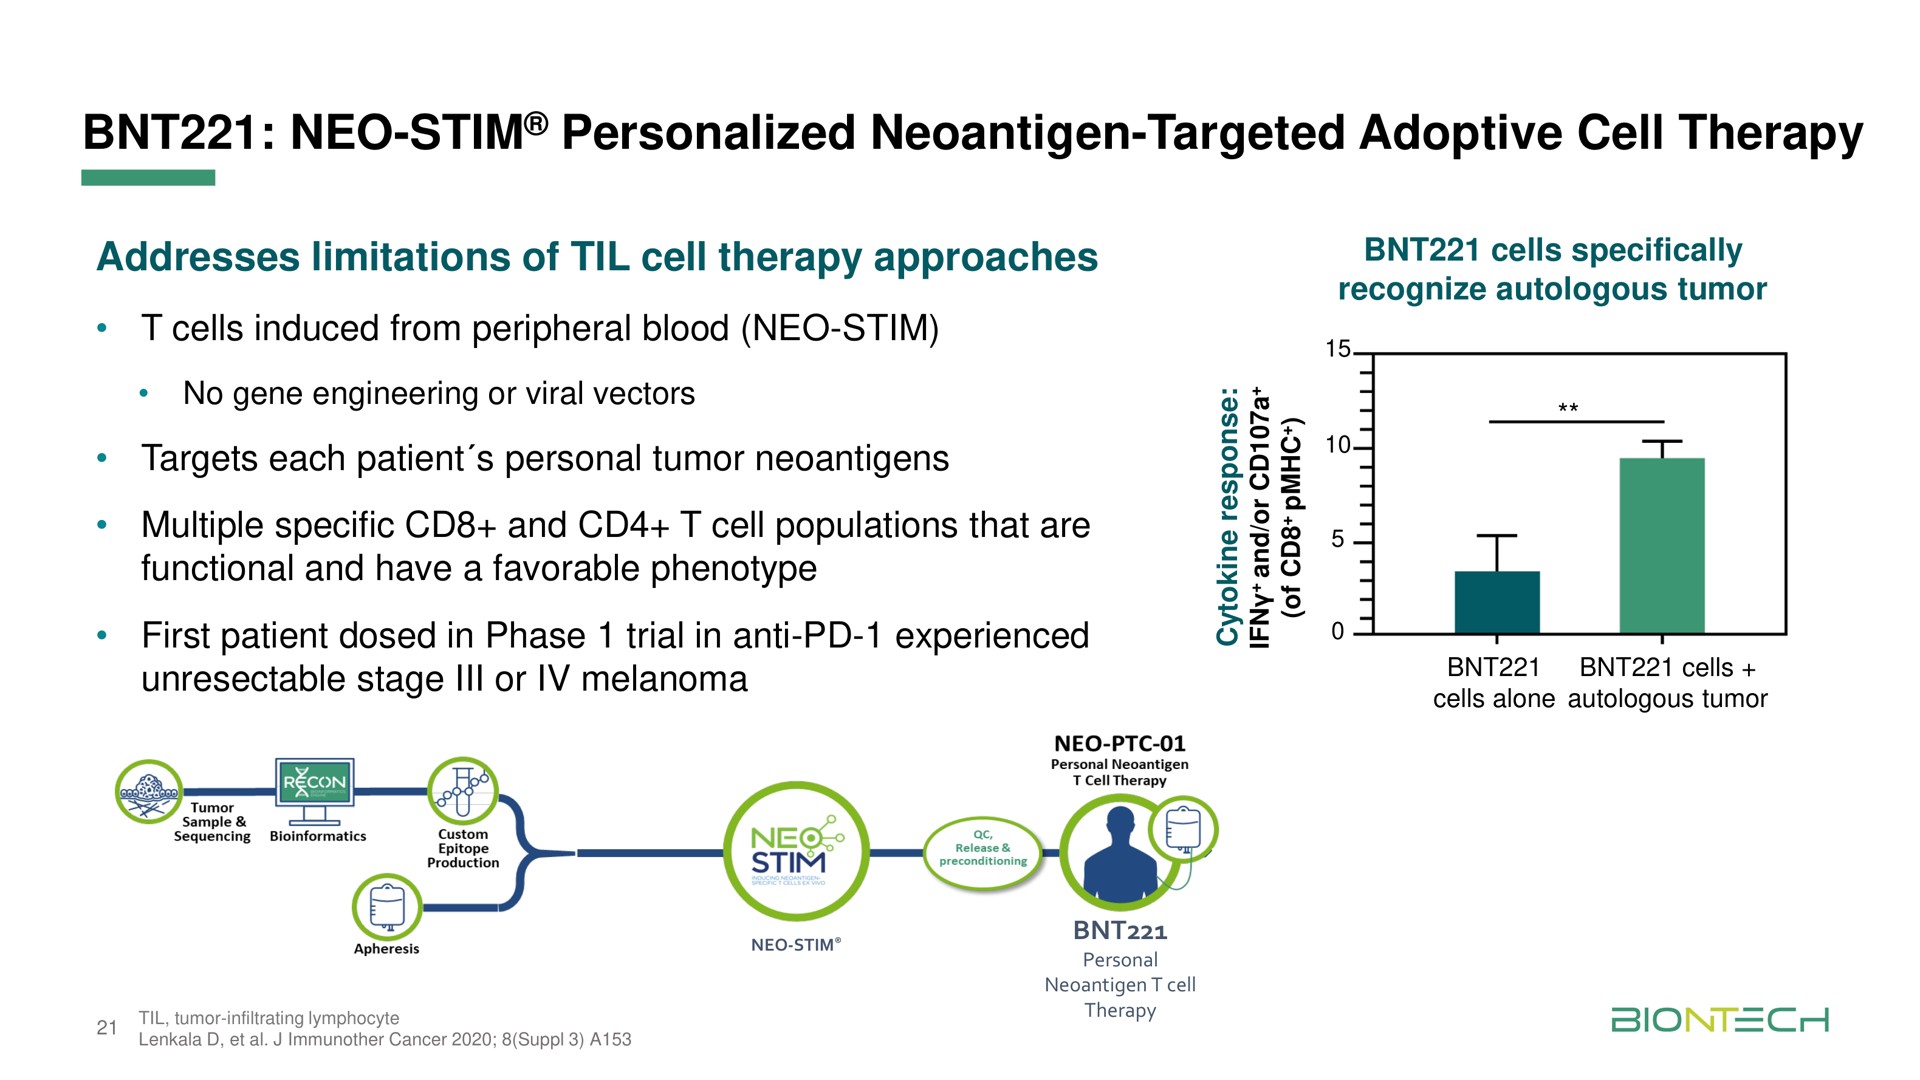 neo stim personalized targeted adoptive cell therapy addresses limitations of til cell therapy approaches | BioNTech